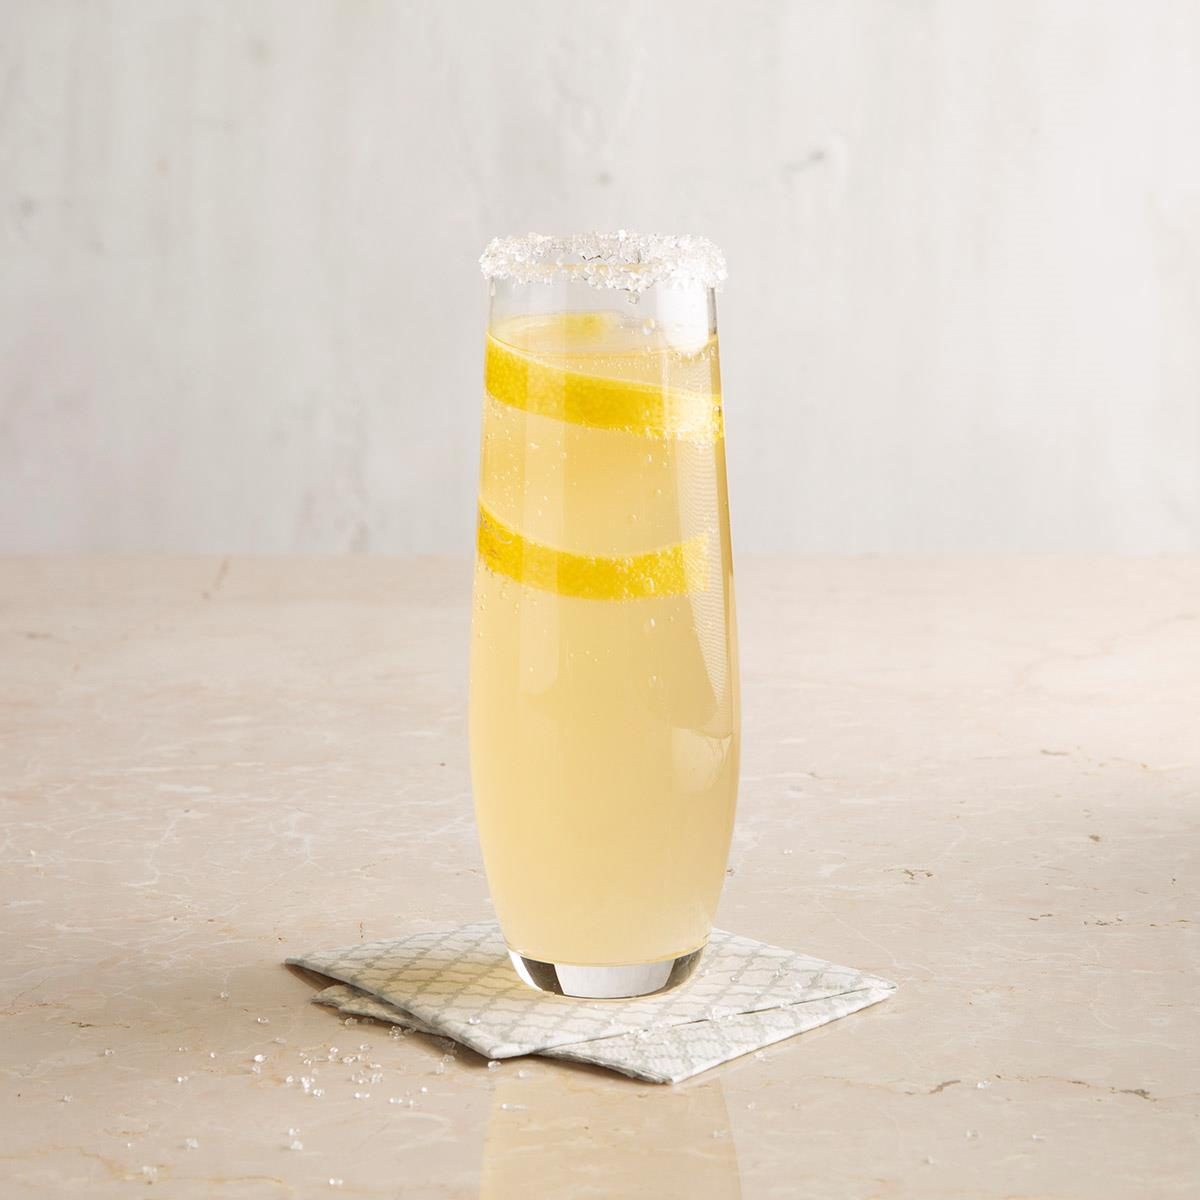 French 75 Exps Ft21 133834 F 0427 1 1